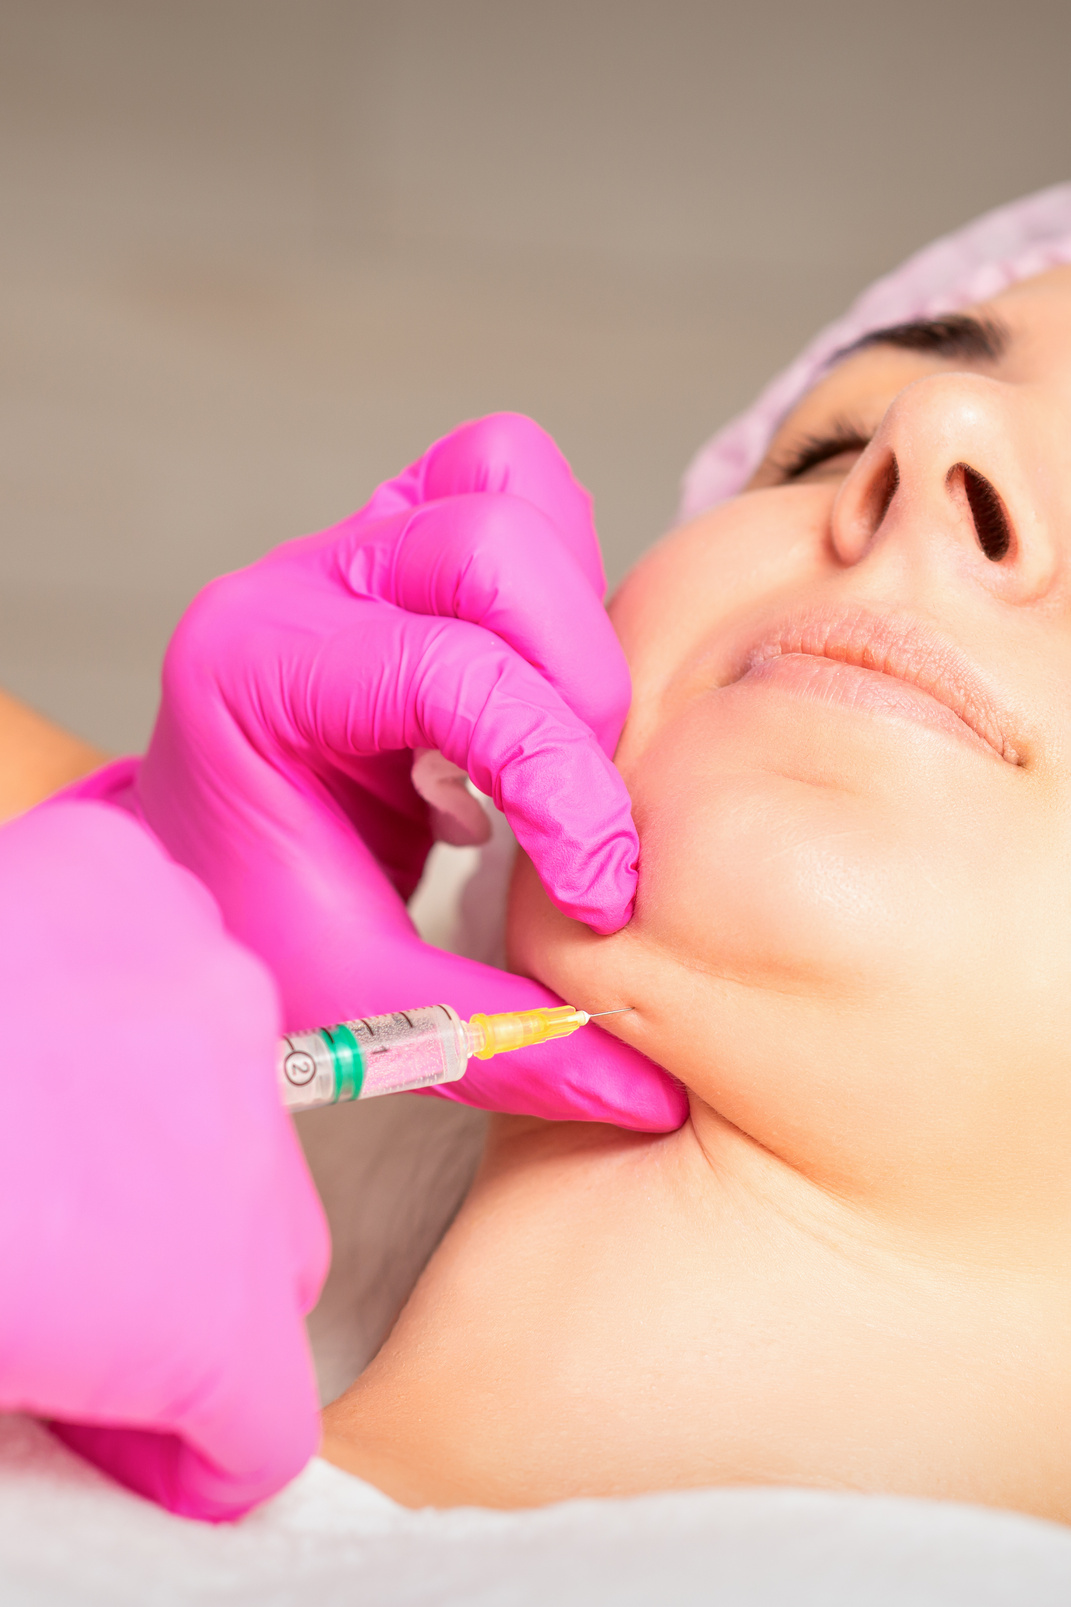 The Cosmetologist Makes Lipolytic Injection on the Chin of a Young Woman against the Double Chin in a Beauty Salon.